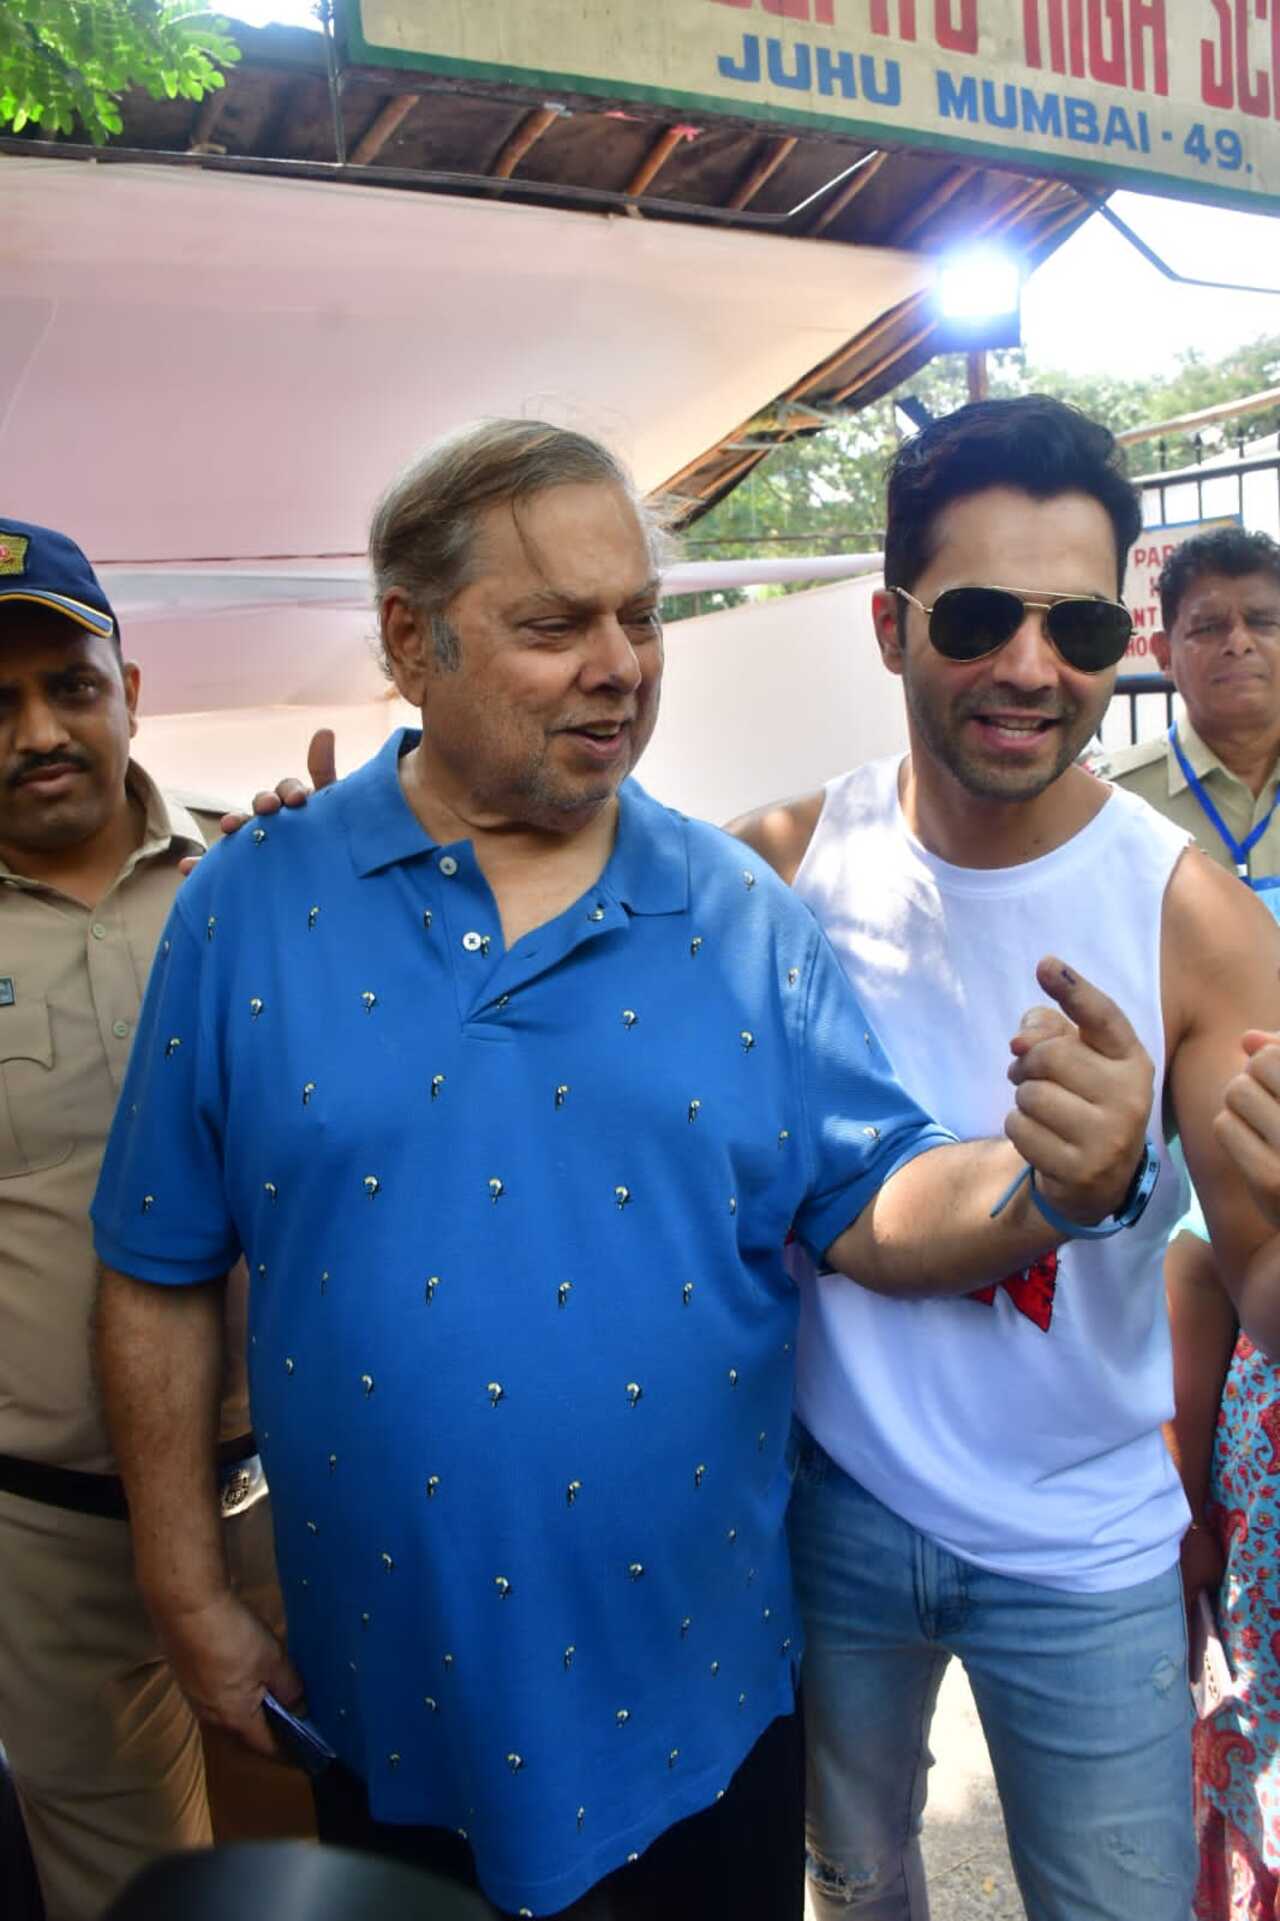 David Dhawan and actor Varun Dhawan arrived together to cast their vote